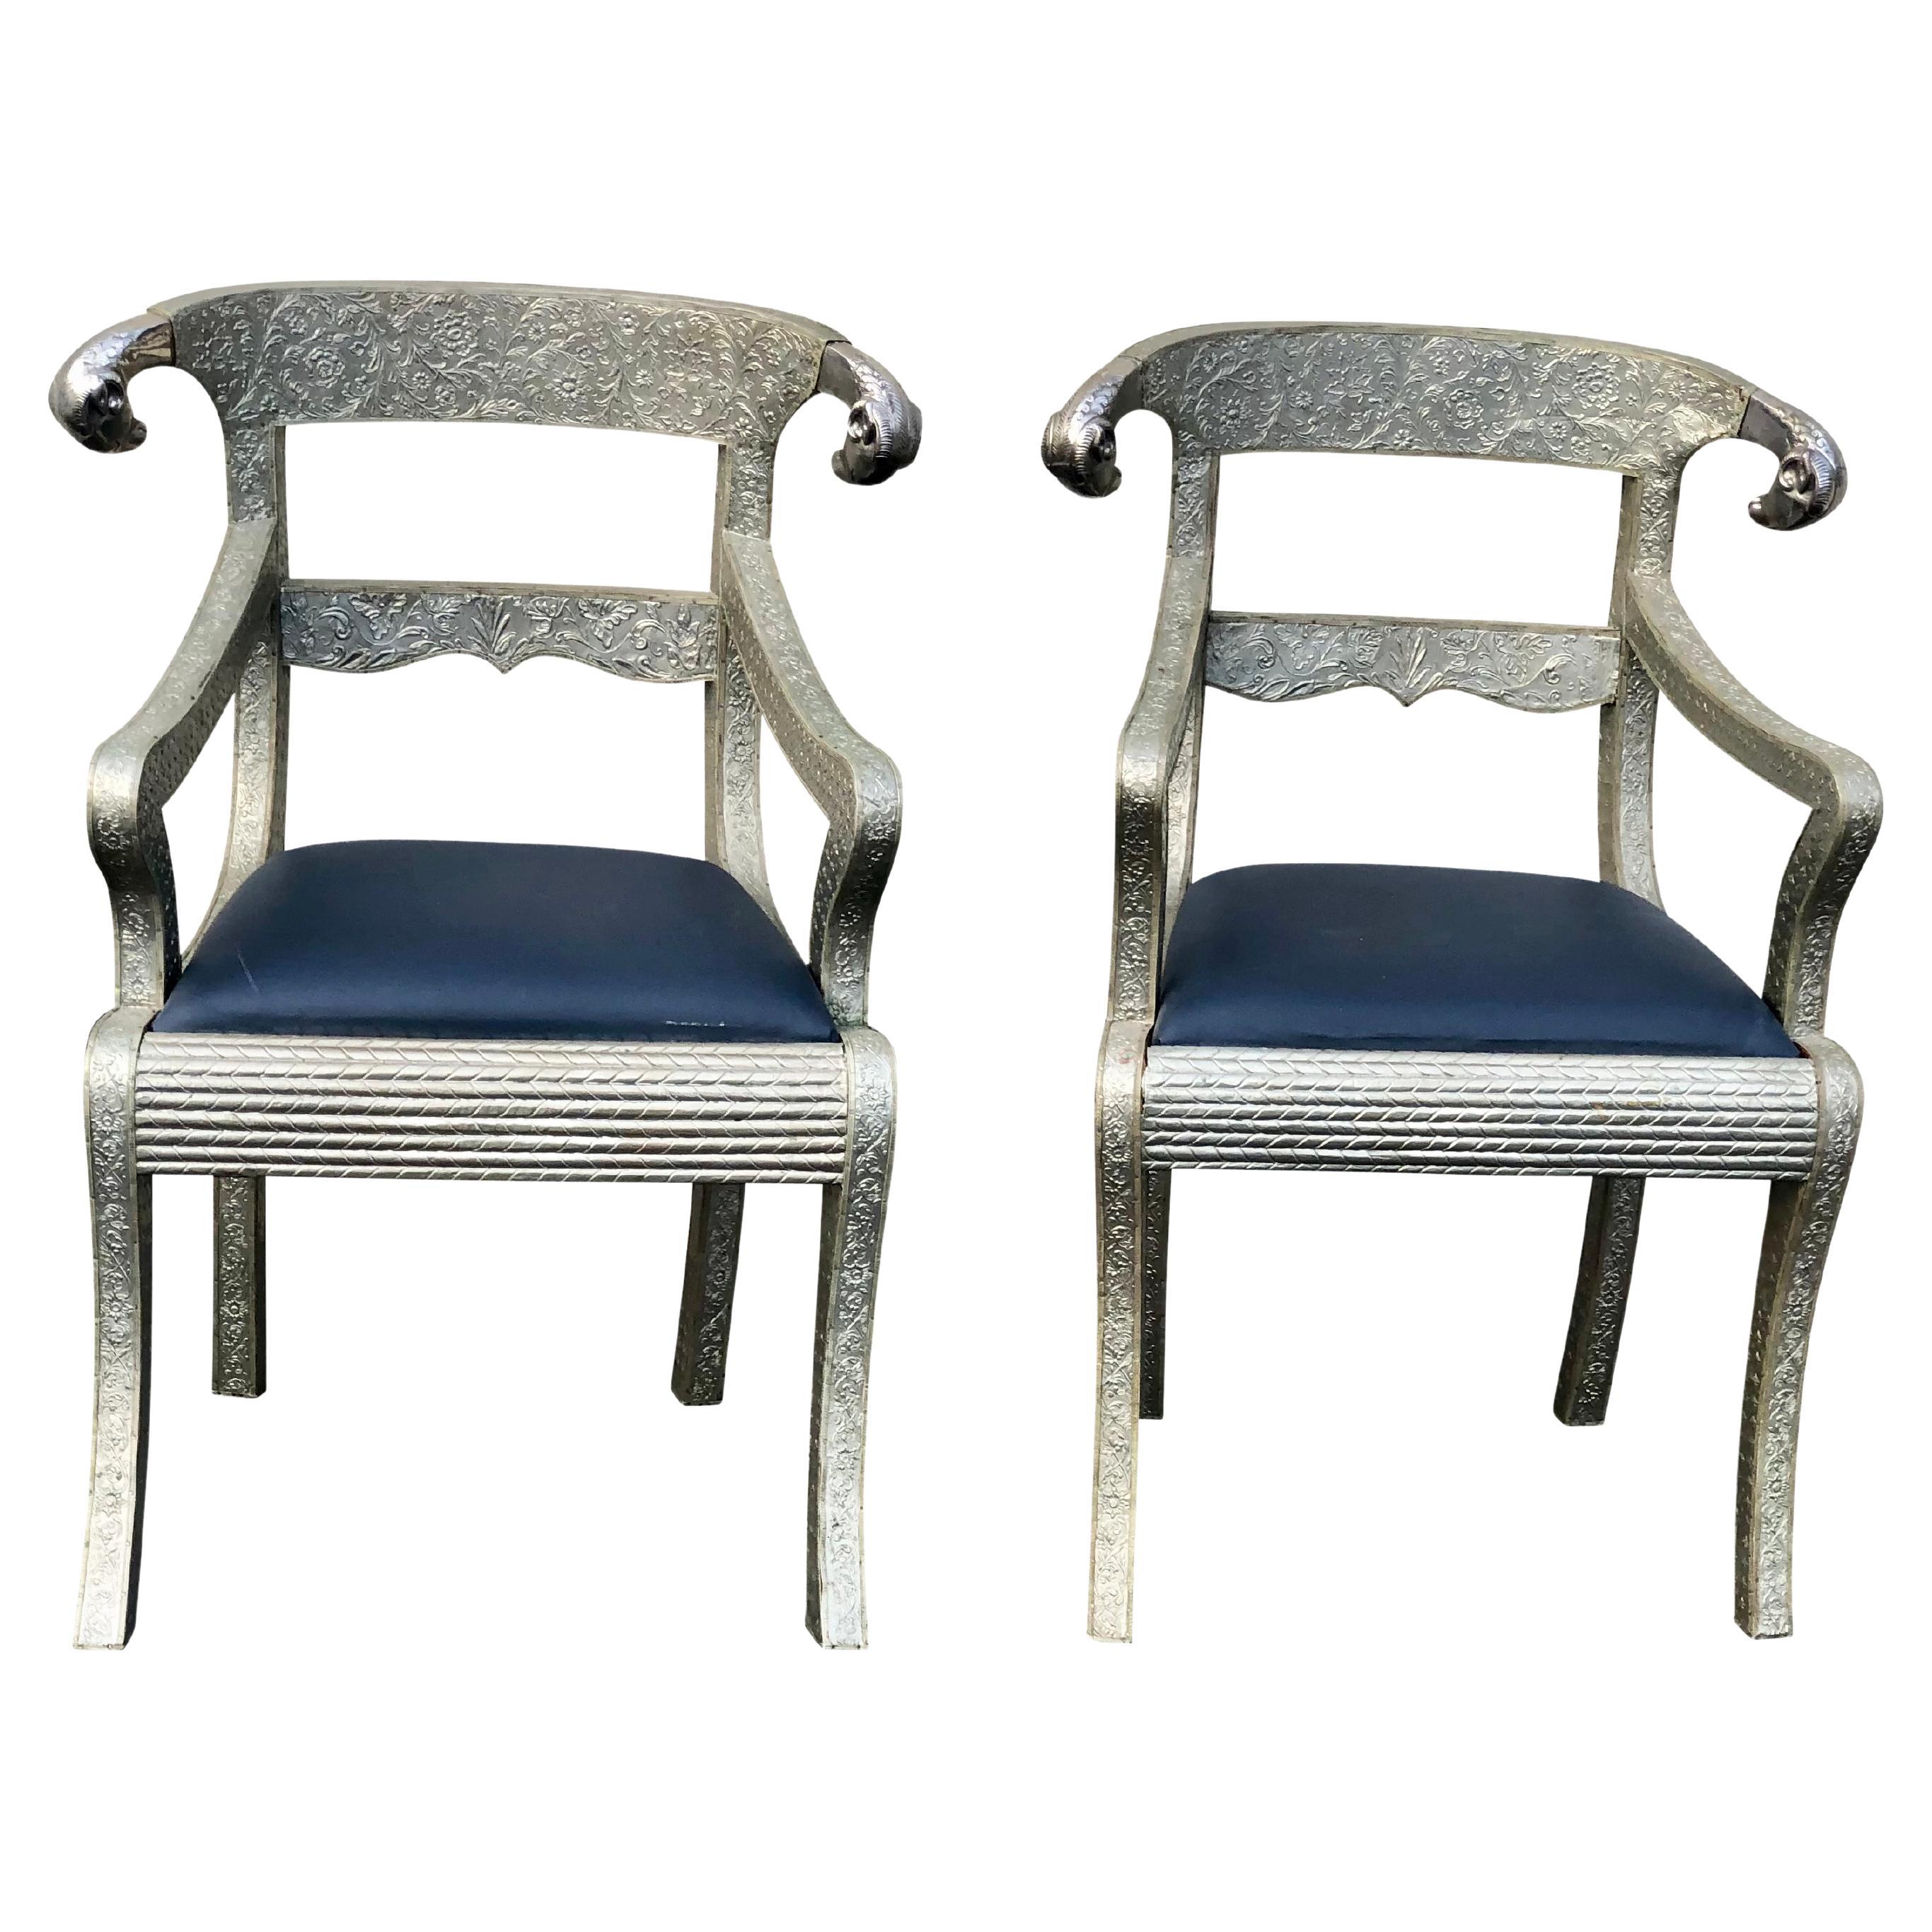 Pair of Anglo Indian Silver Metal Clad Armchairs With Rams Heads. For Sale